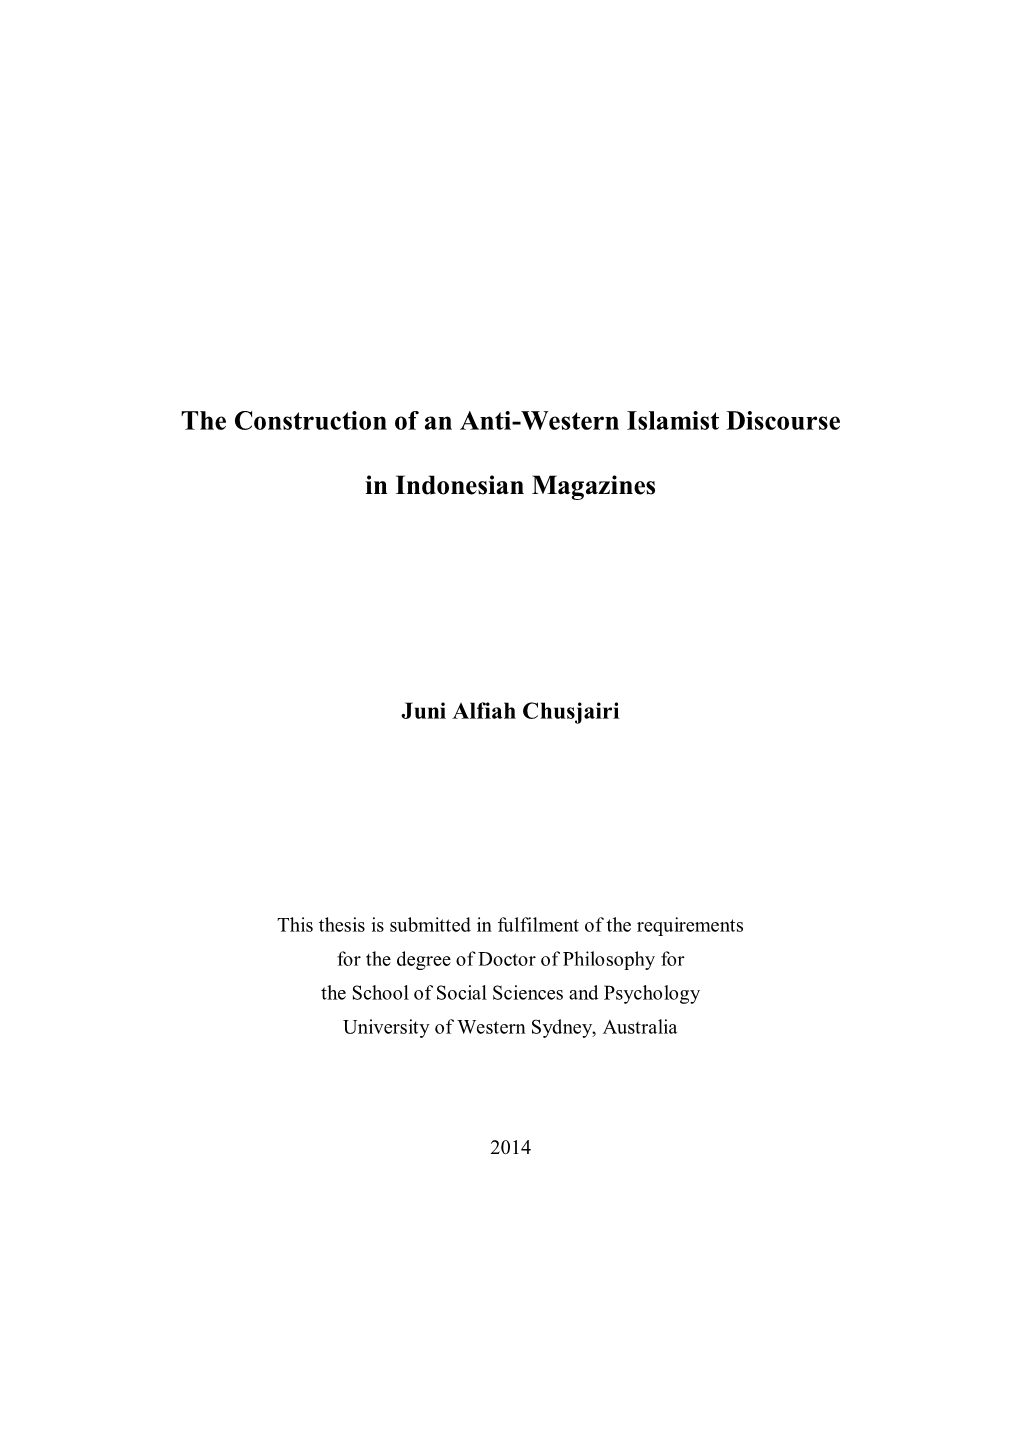 The Construction of an Anti-Western Islamist Discourse in Indonesian